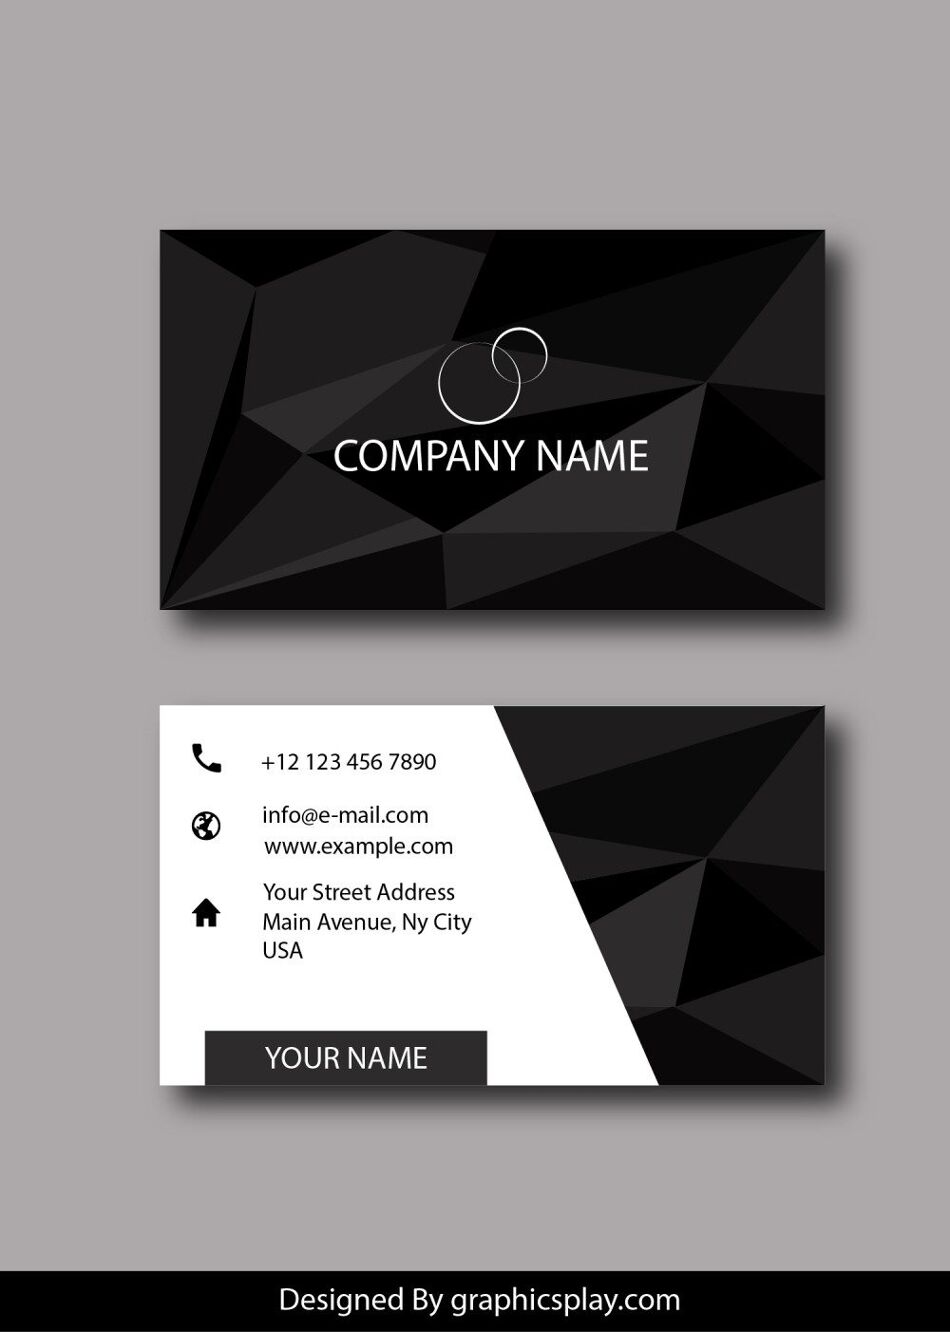 Business Card Design Vector Template - ID 1785 1